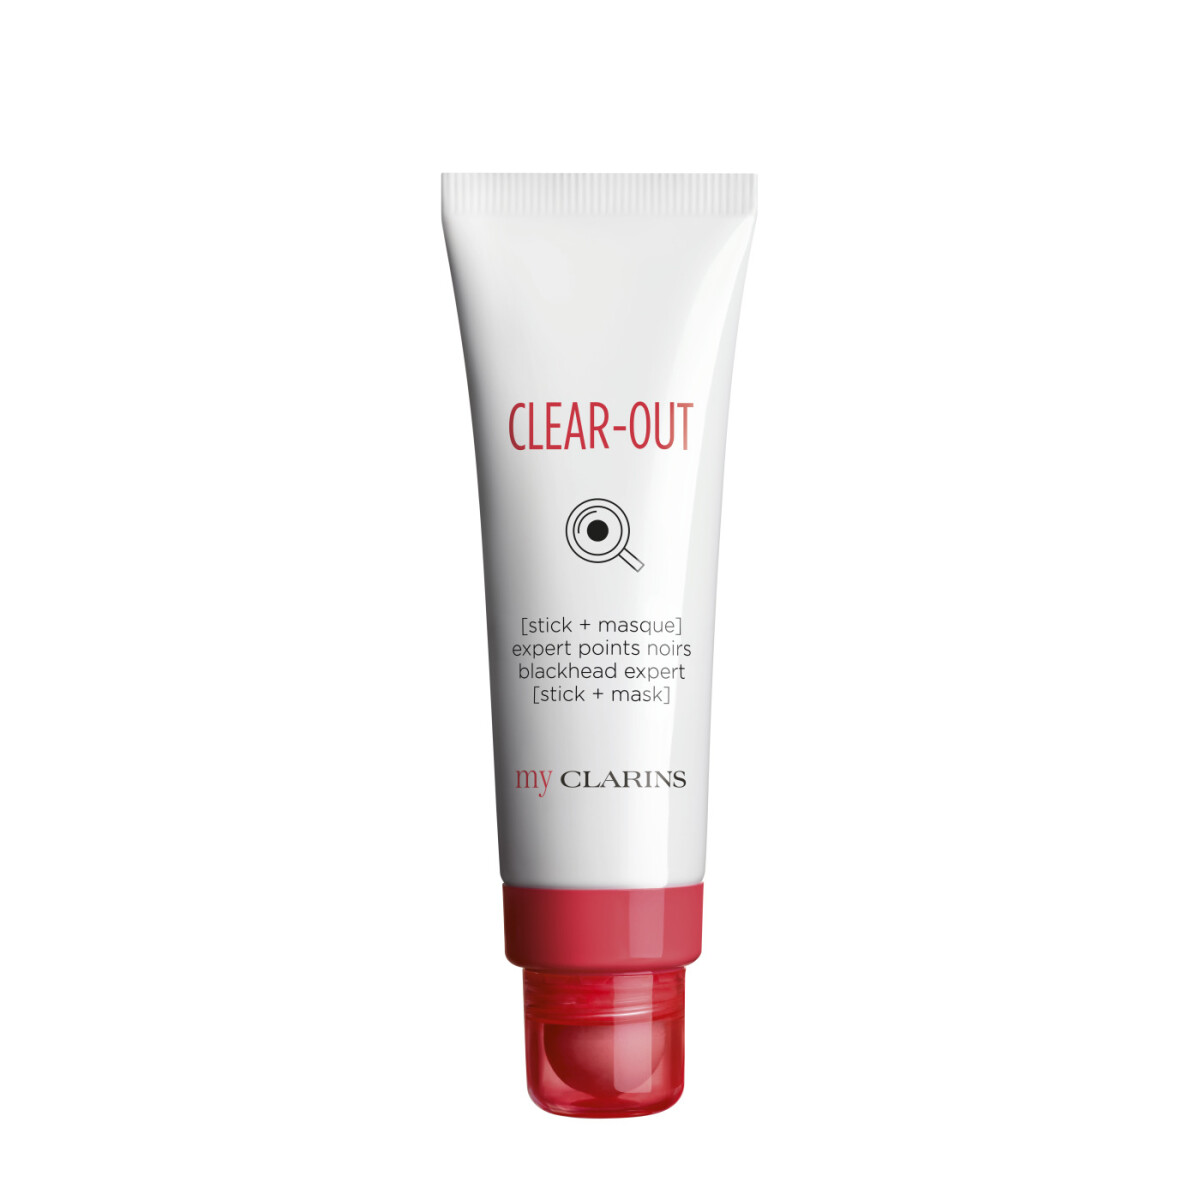 My Clarins Clear-Out Anti Blackh St+Mask 